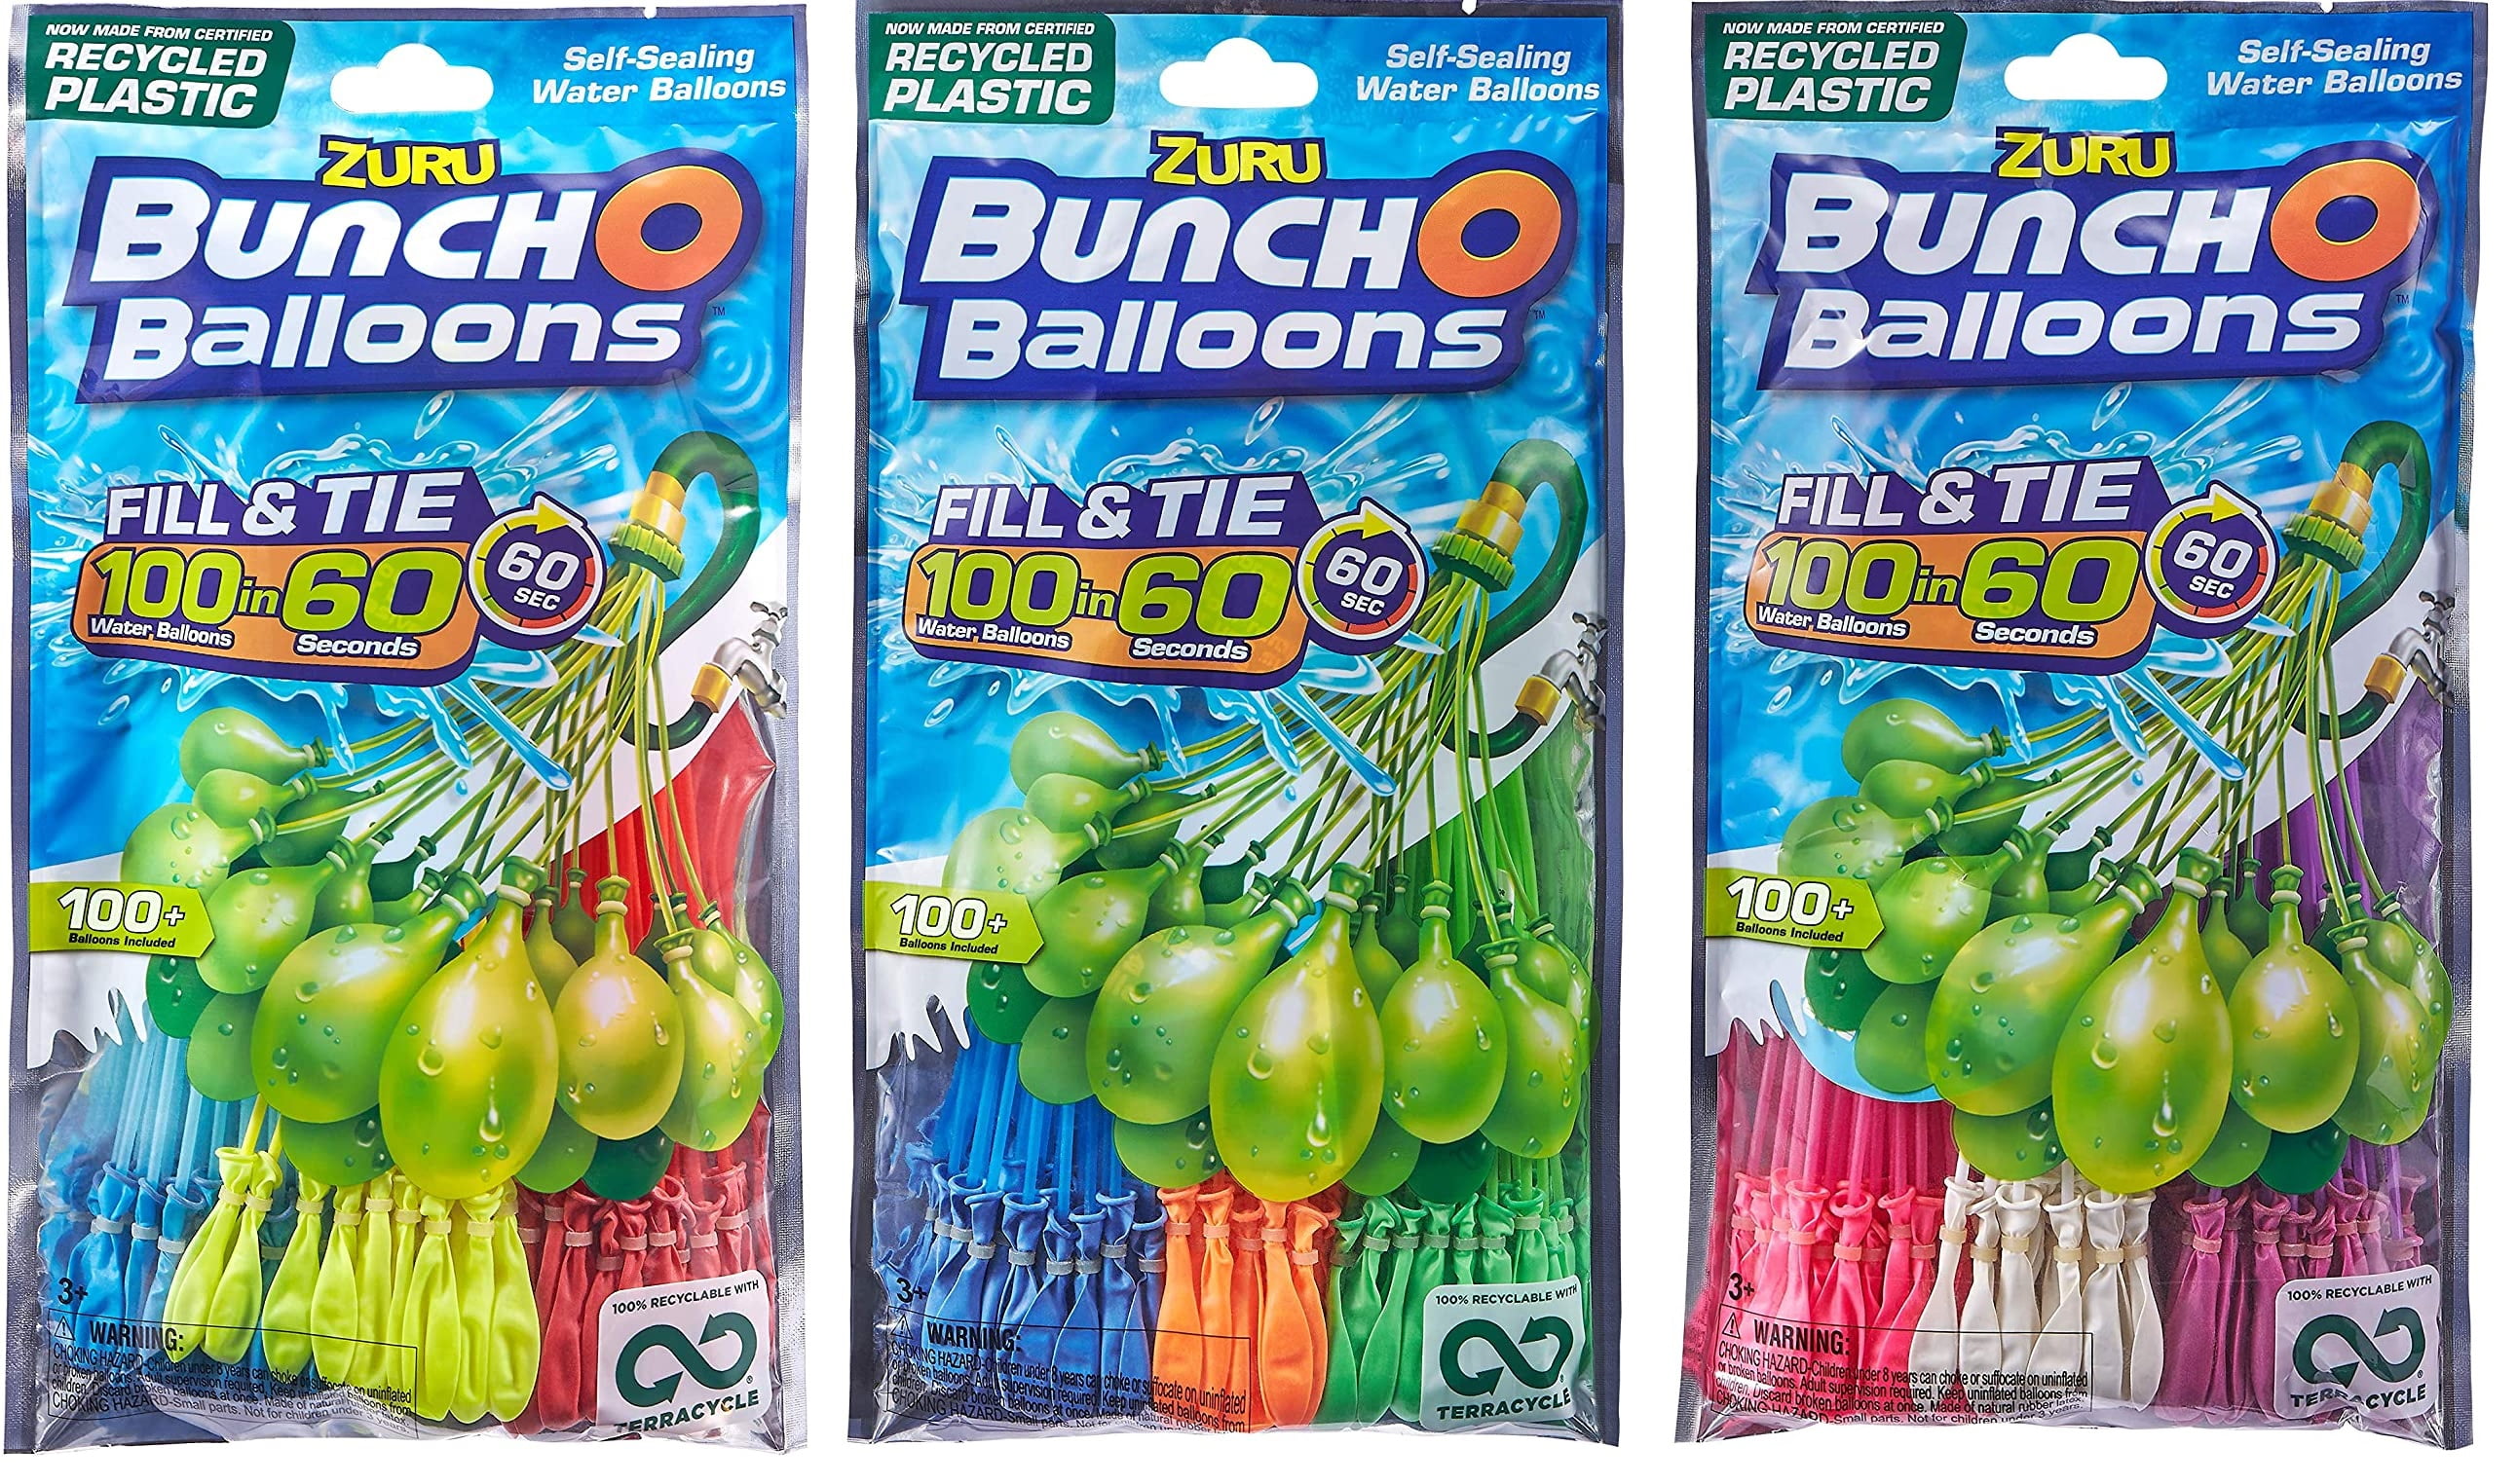 Zuru Bunch O Balloons Lot of 3 Packages of 100 Water Balloons 300 Total 